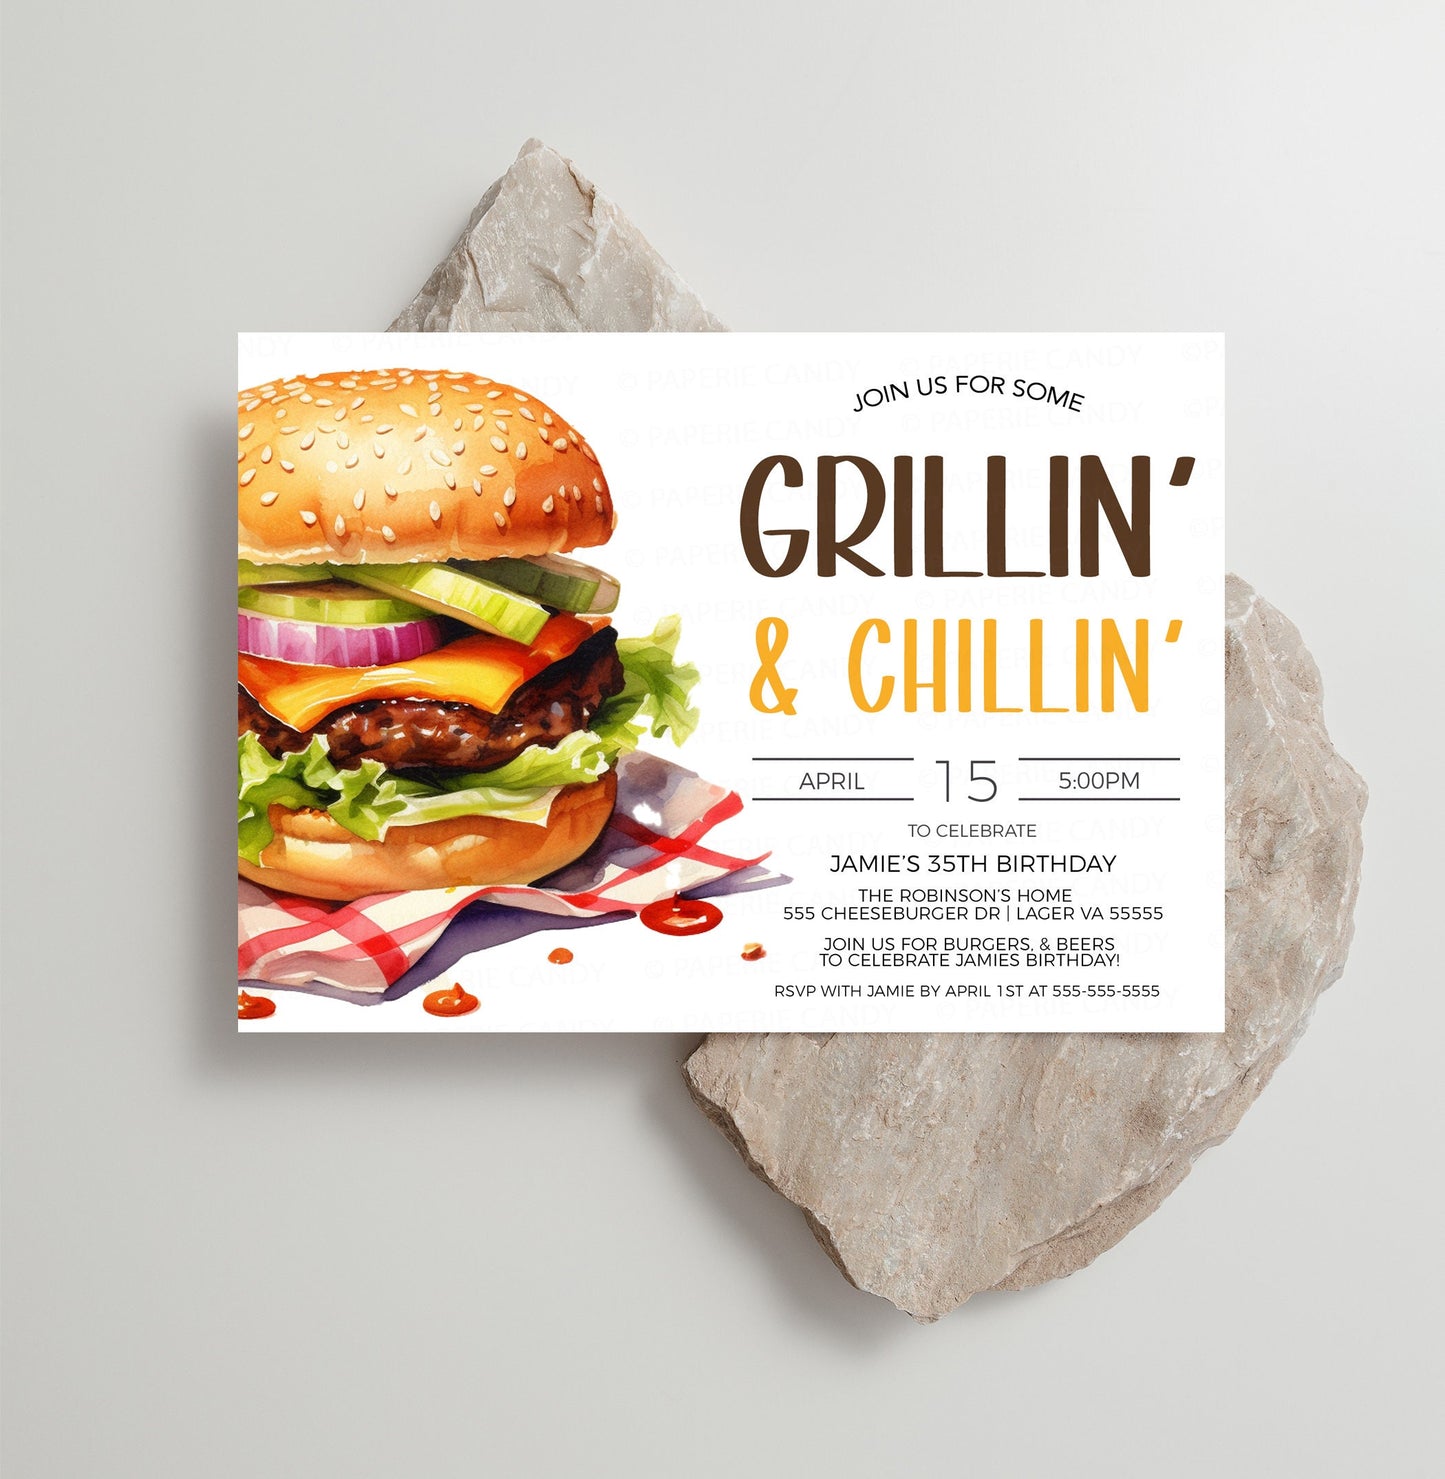 Grillin' And Chillin' Invitation, BBQ Barbeque Invite, Burgers Beer Birthday Party, Grilling Cookout Barbecue Party, Printable Template